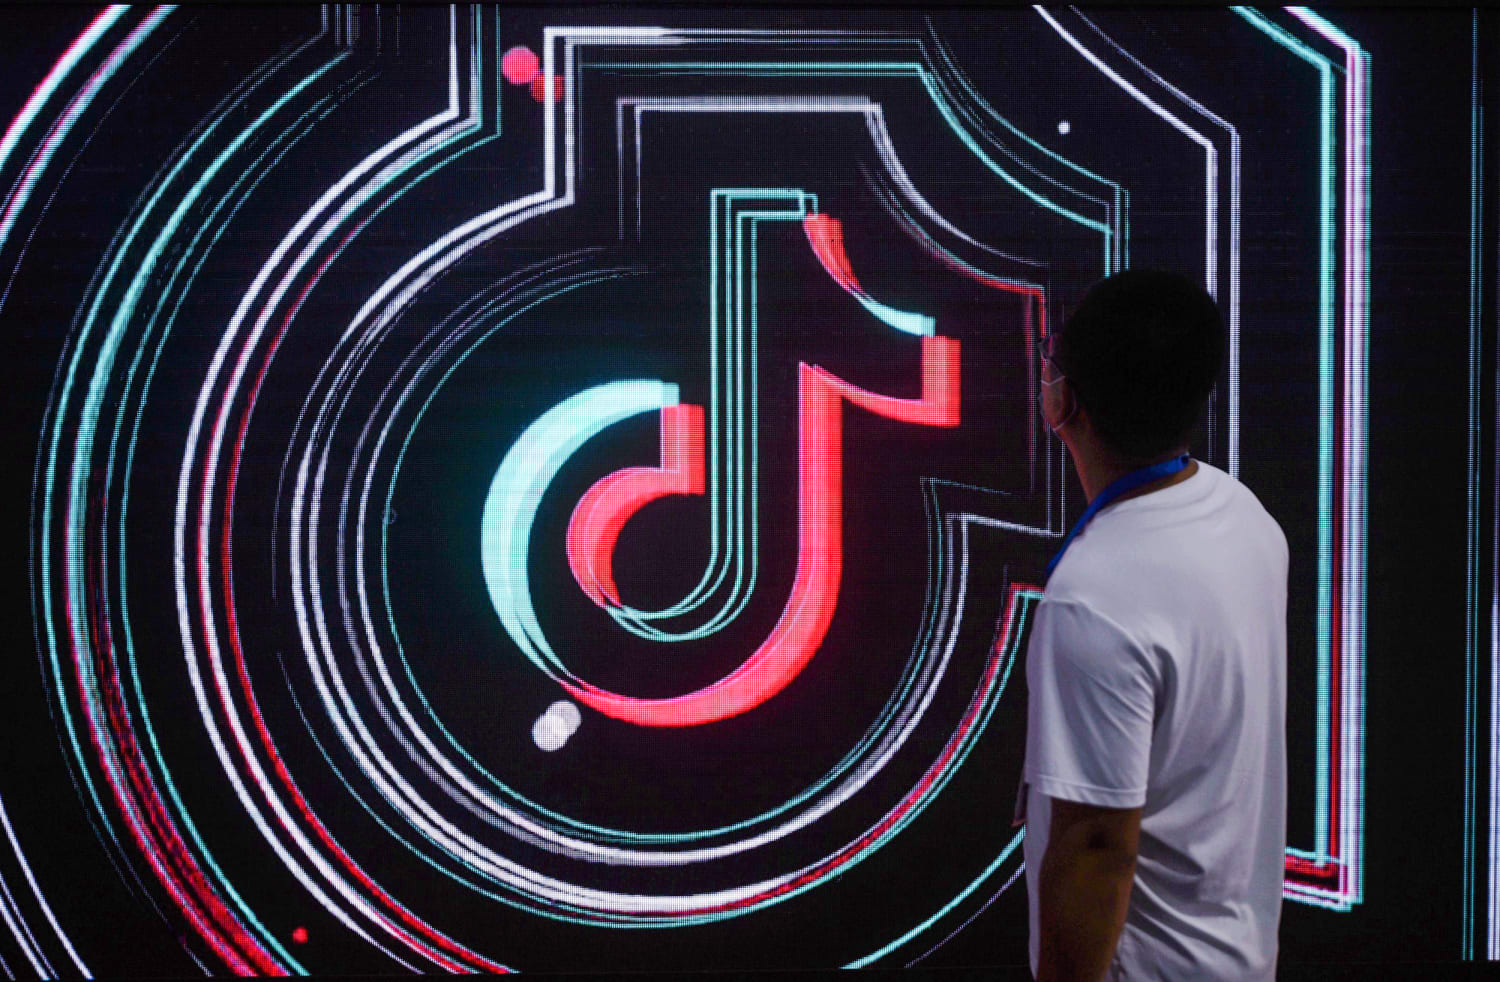 Chinese apps remain hugely popular in the U.S. despite efforts to ban TikTok